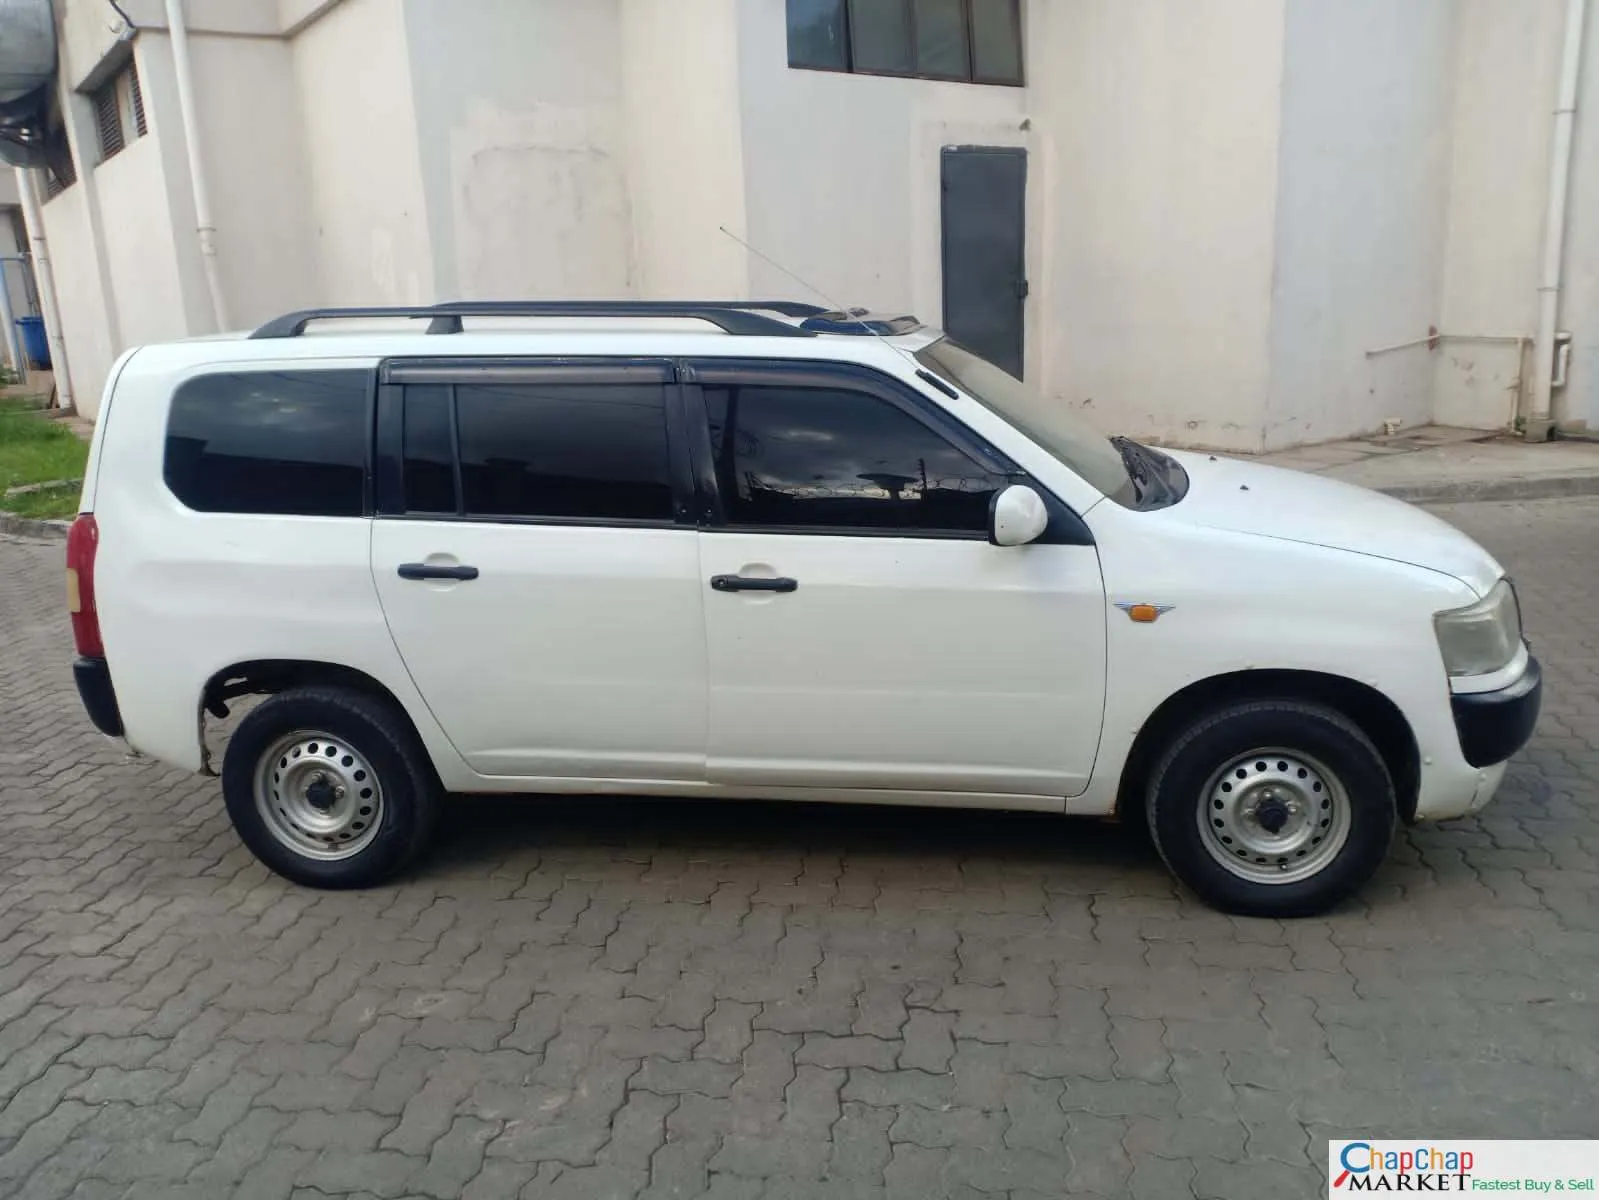 Cars Cars For Sale/Vehicles-Toyota PROBOX for sale in Kenya QUICK SALE You Pay 30% Deposit Trade in OK EXCLUSIVE 2